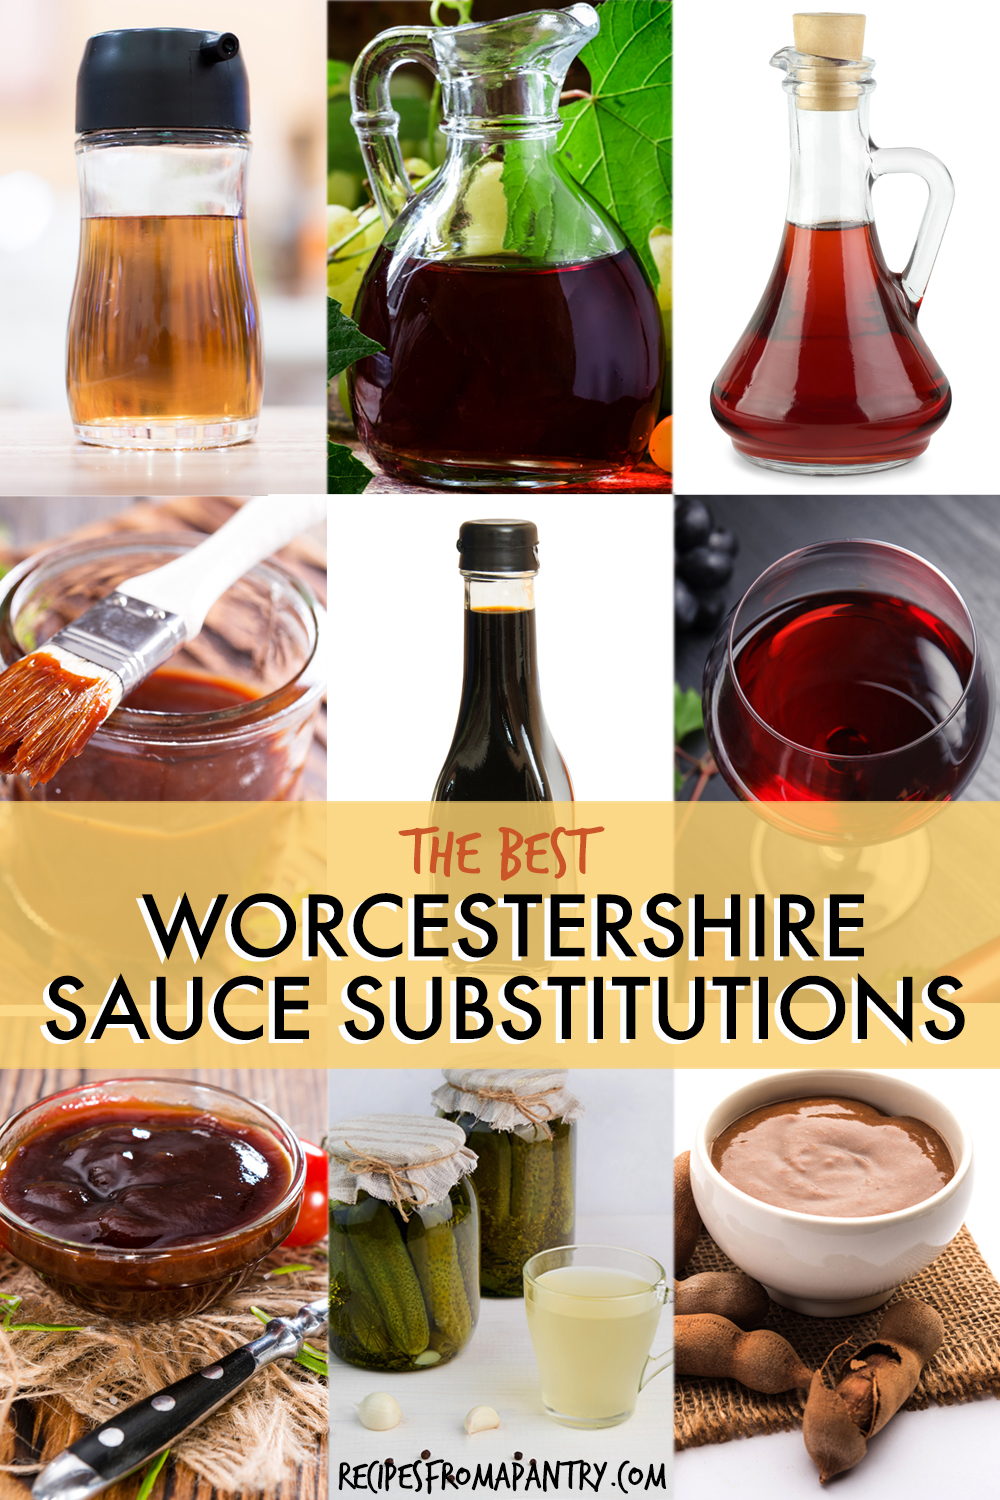 A collage of images of items that can be used replacements for Worcestershire sauce.